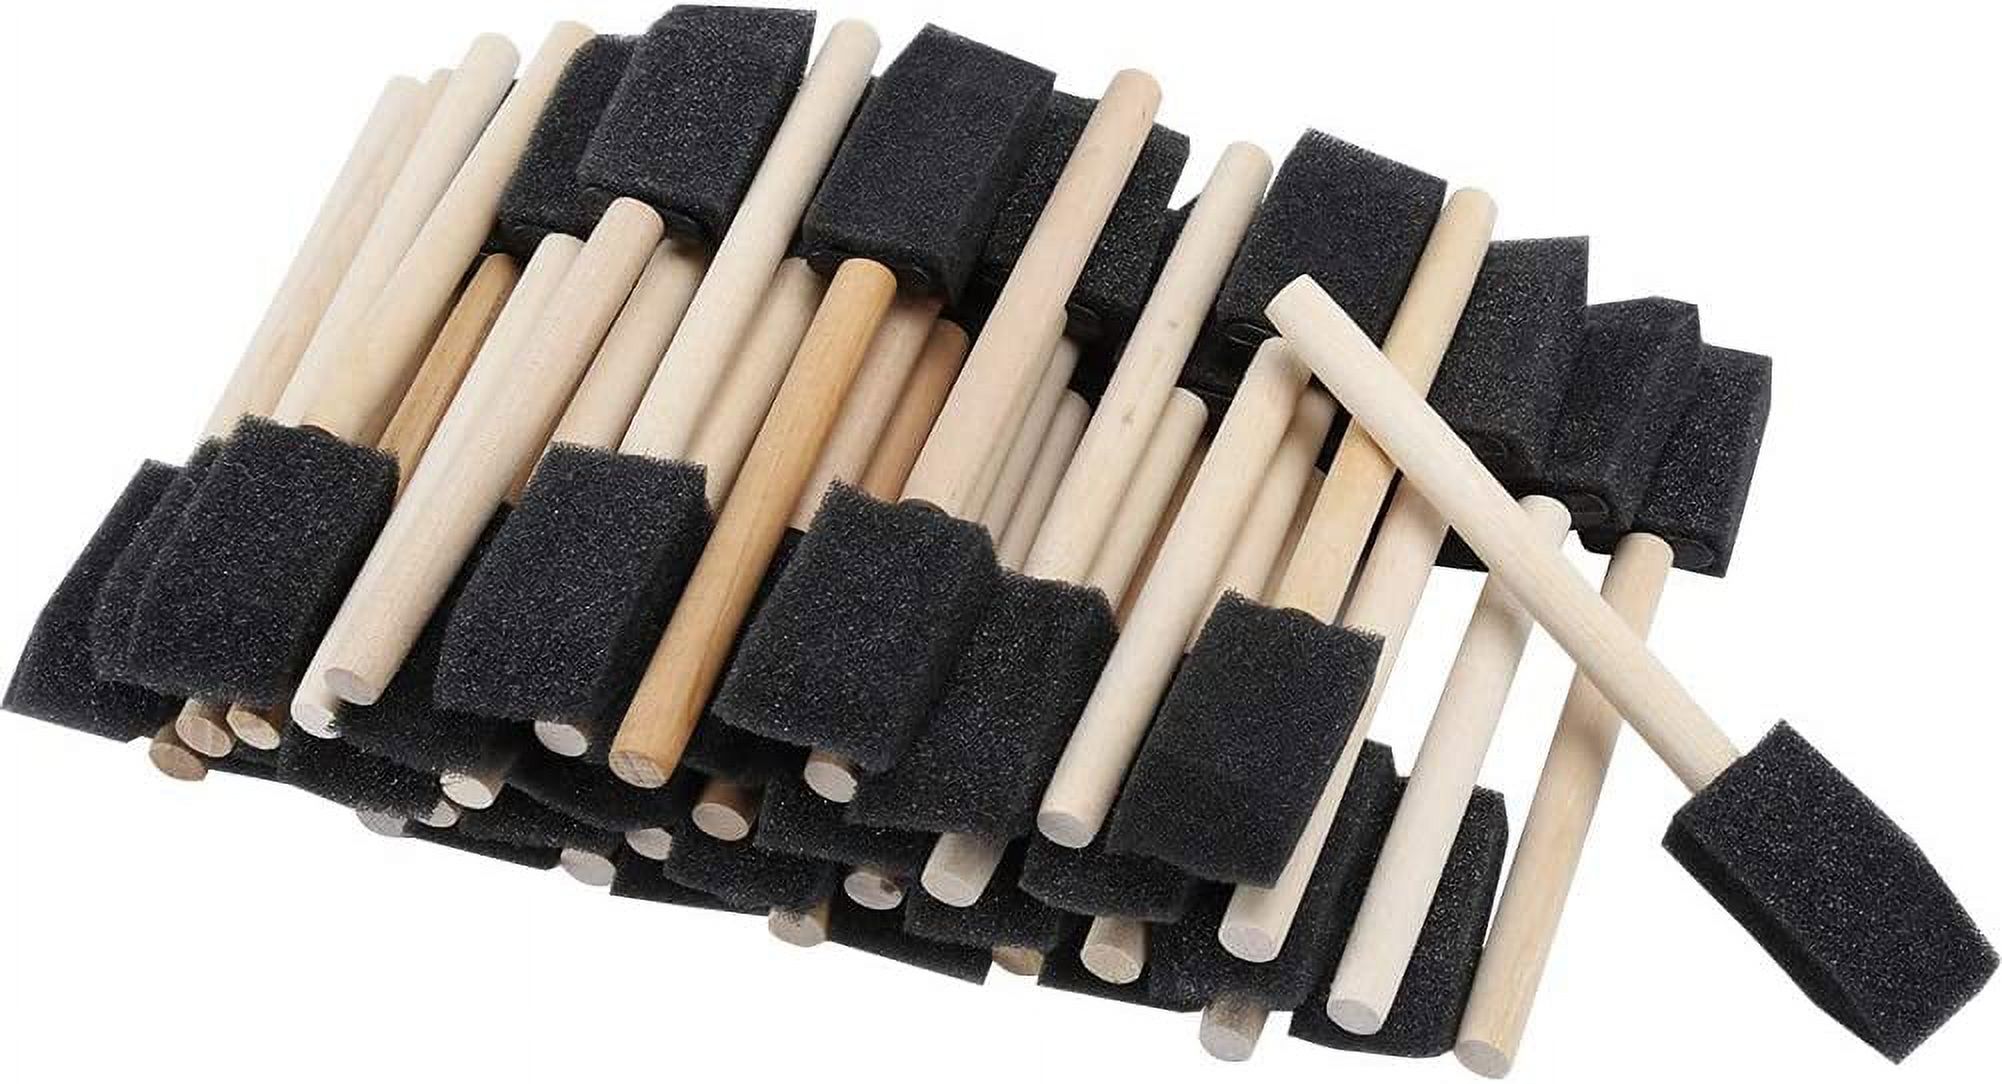 Foam Paint Brush, Sponge Paint Brush Sponge Brush Foam Paint Brushes, for Art Classes DIY Projects